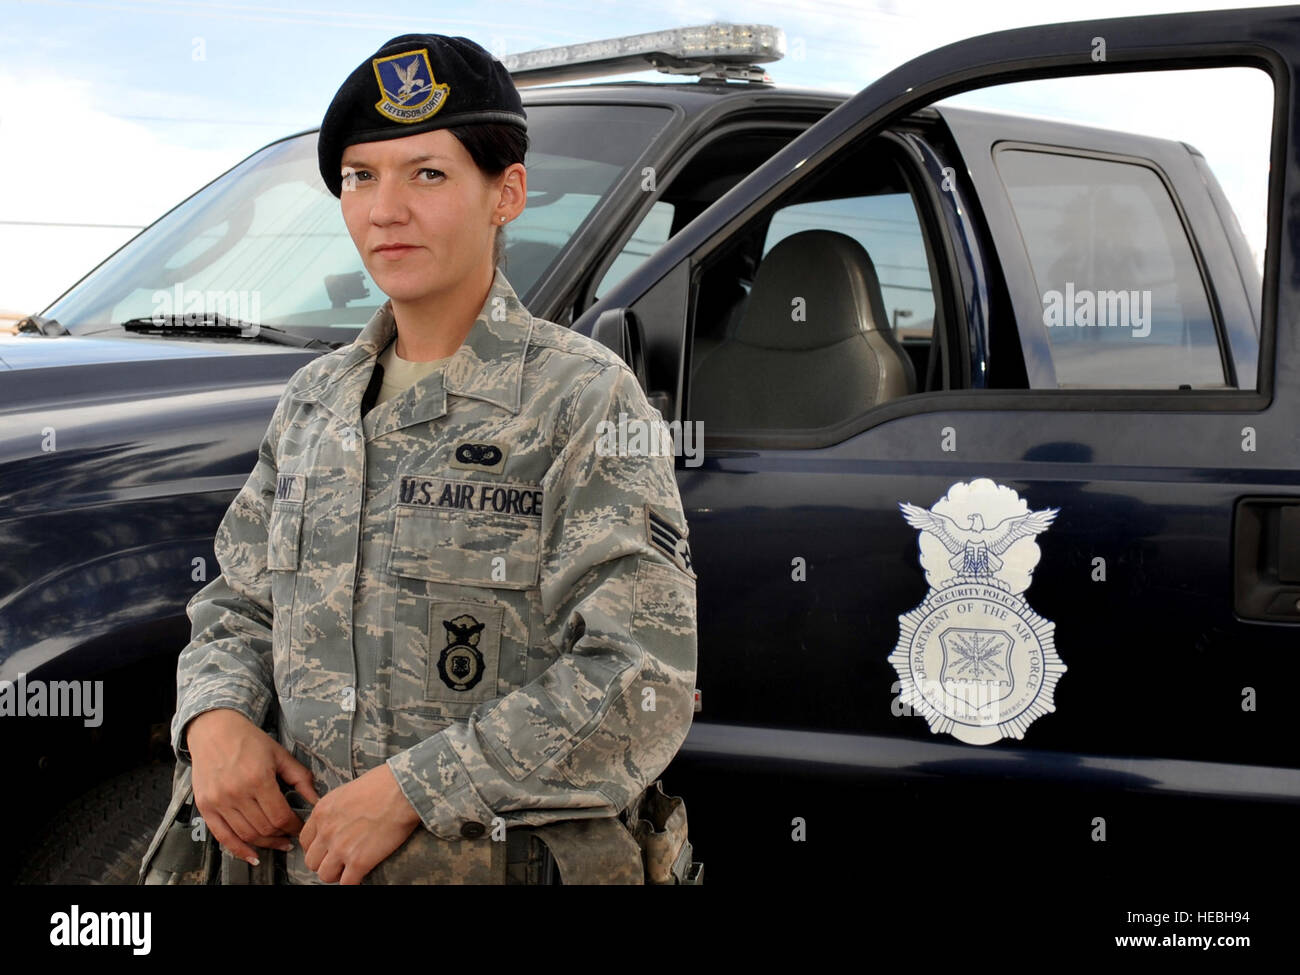 U.S. Air Force - Security Forces Overview